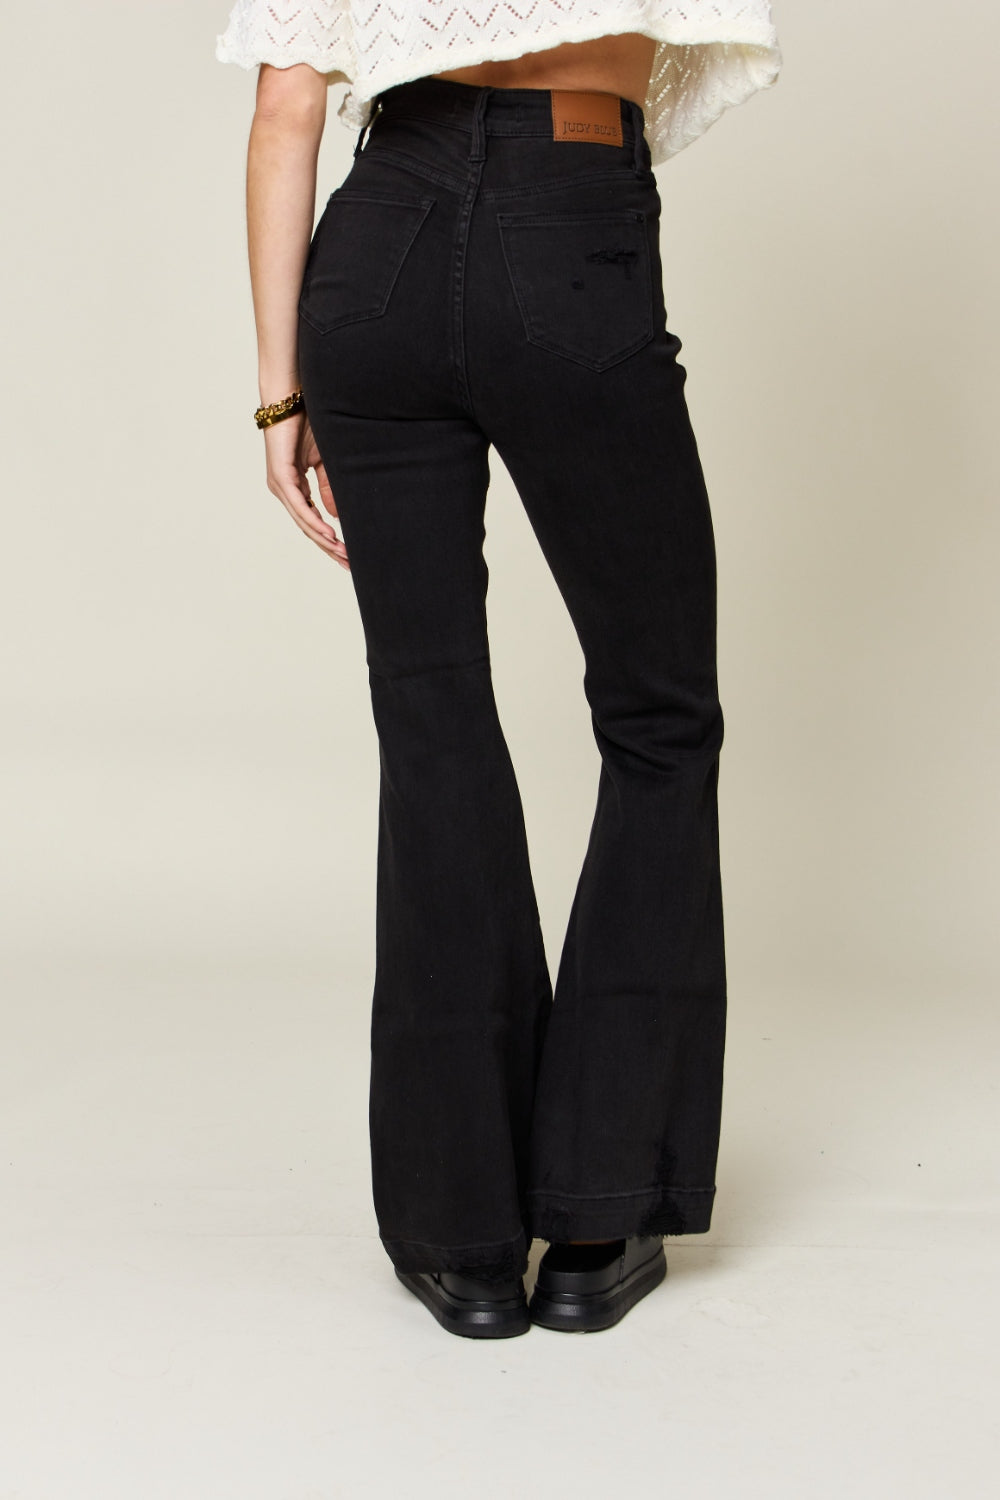 Black Full Size High Waist Distressed Flare Jeans